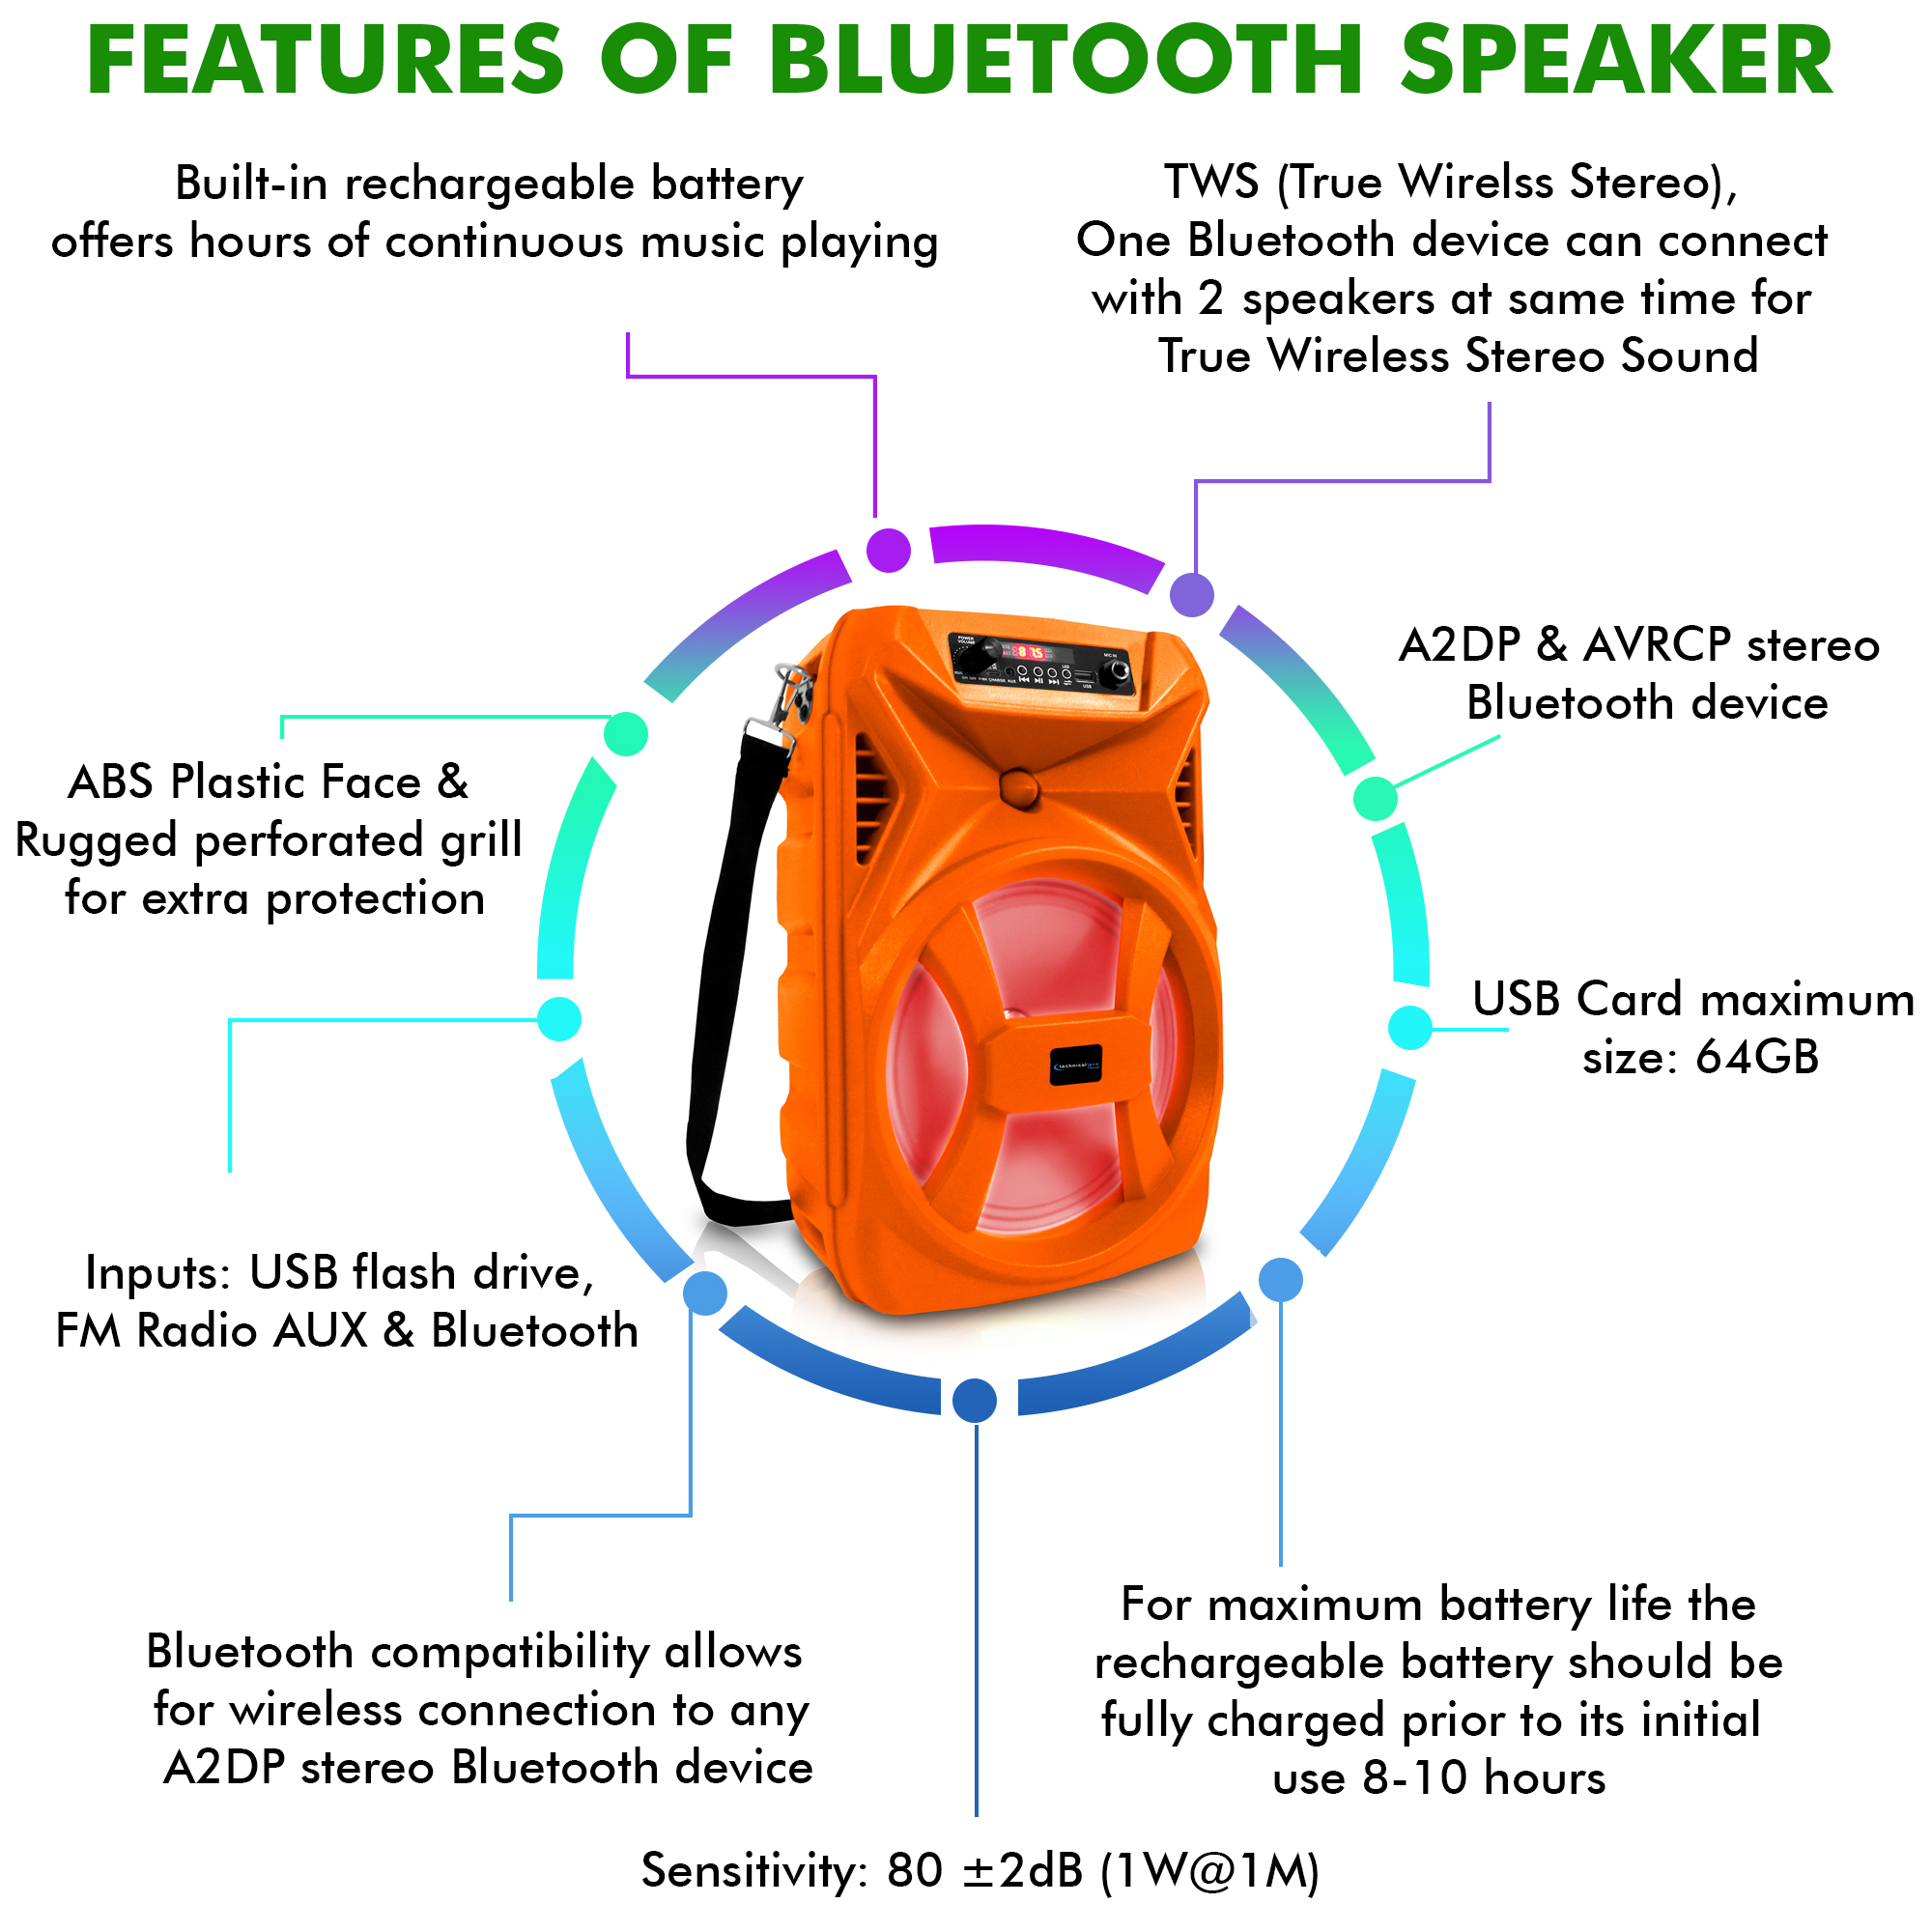 Technical Pro 8 Inch 500 Watts Portable Bluetooth Speaker with Woofer & Tweeter, Festival PA LED Speaker with Bluetooth/USB Card Inputs, True Wireless Stereo, 30 Feet Bluetooth Range(Orange) - image 3 of 7